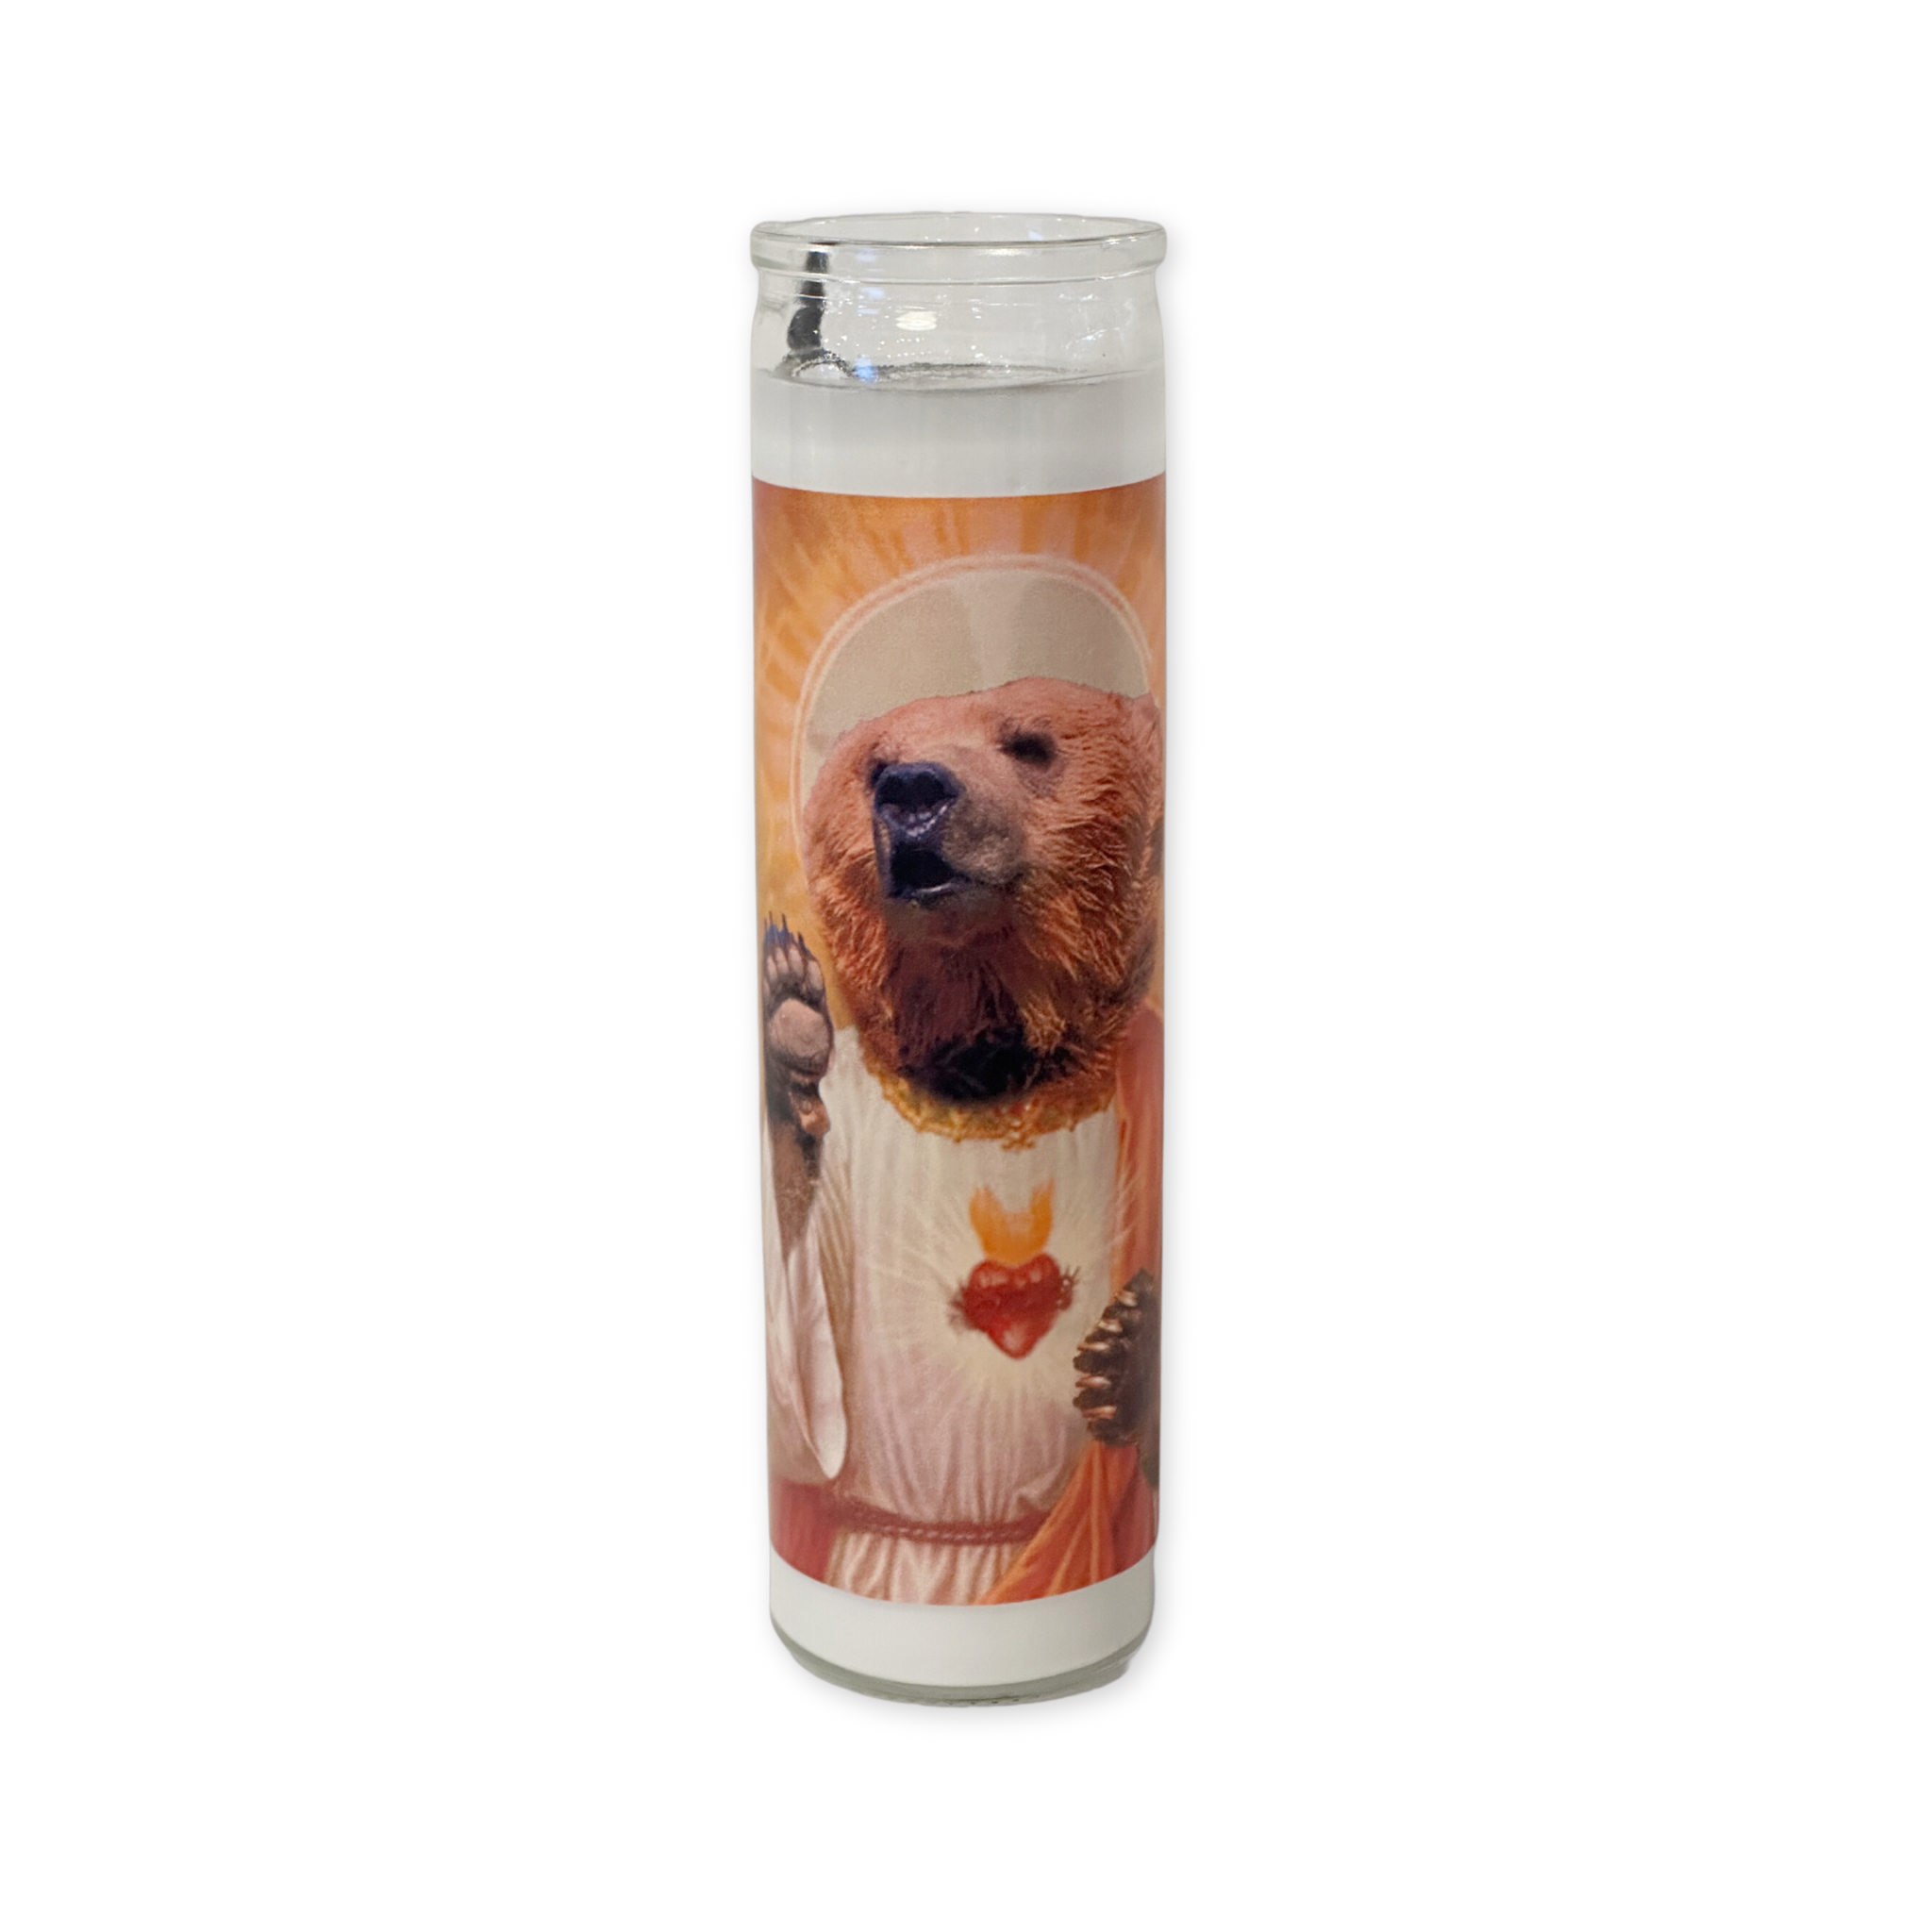 unscented prayer candle with a bear